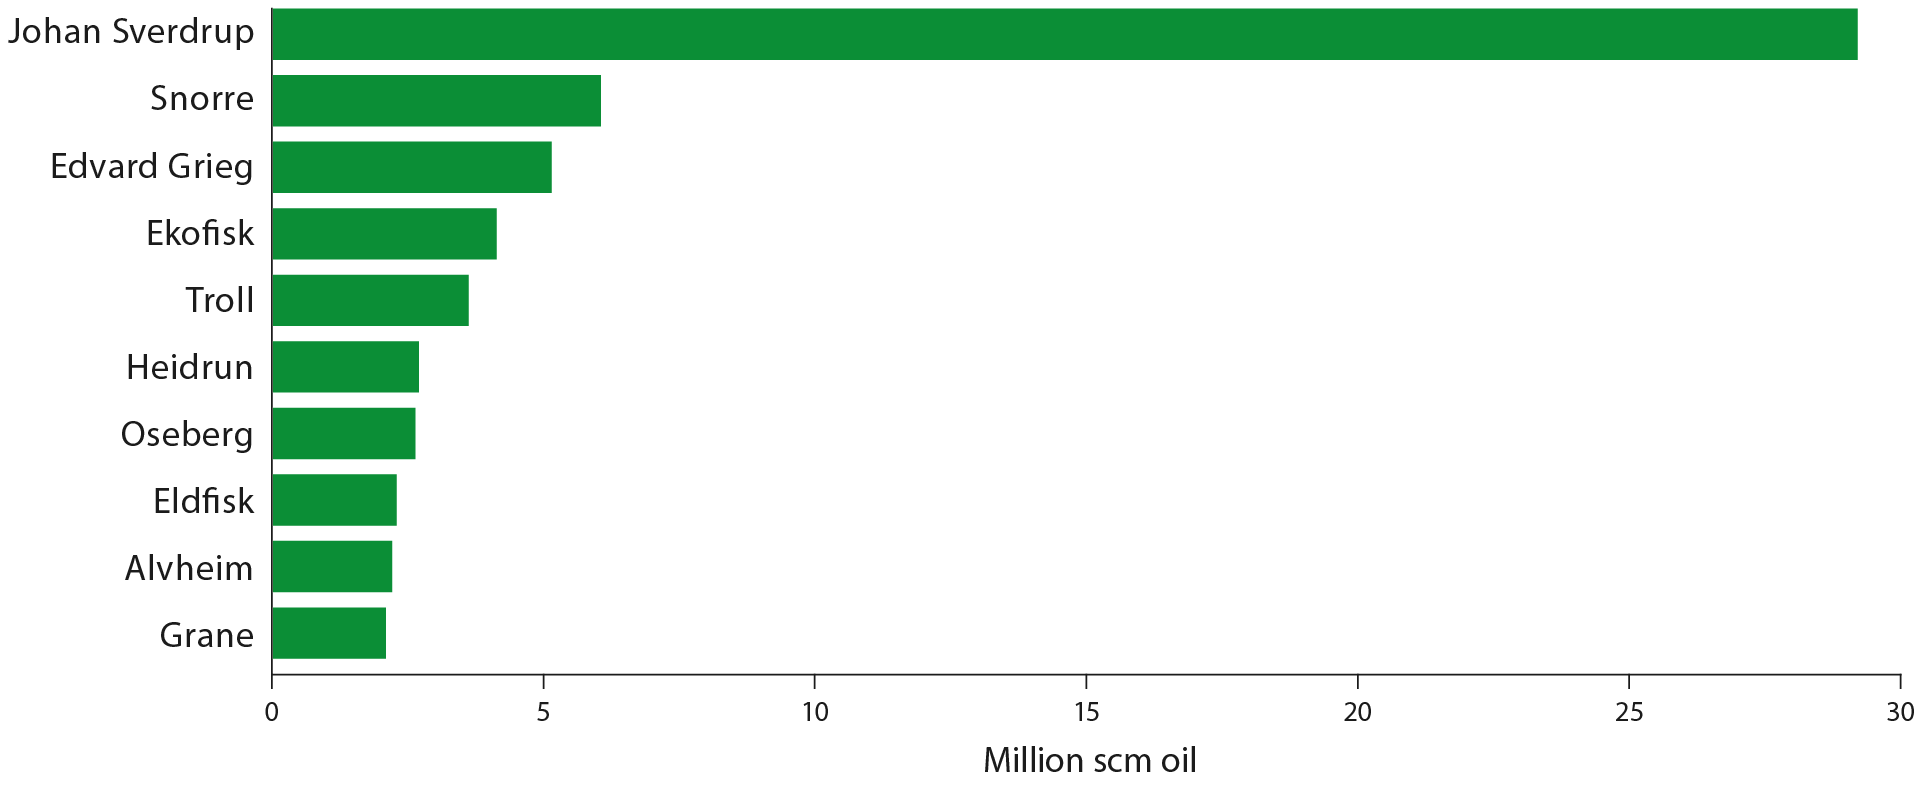 the figure shows the ten largest fields in 2022 measured by oil production in a descending way. Johan Sverdrup is the largest and Grane the tenth largest